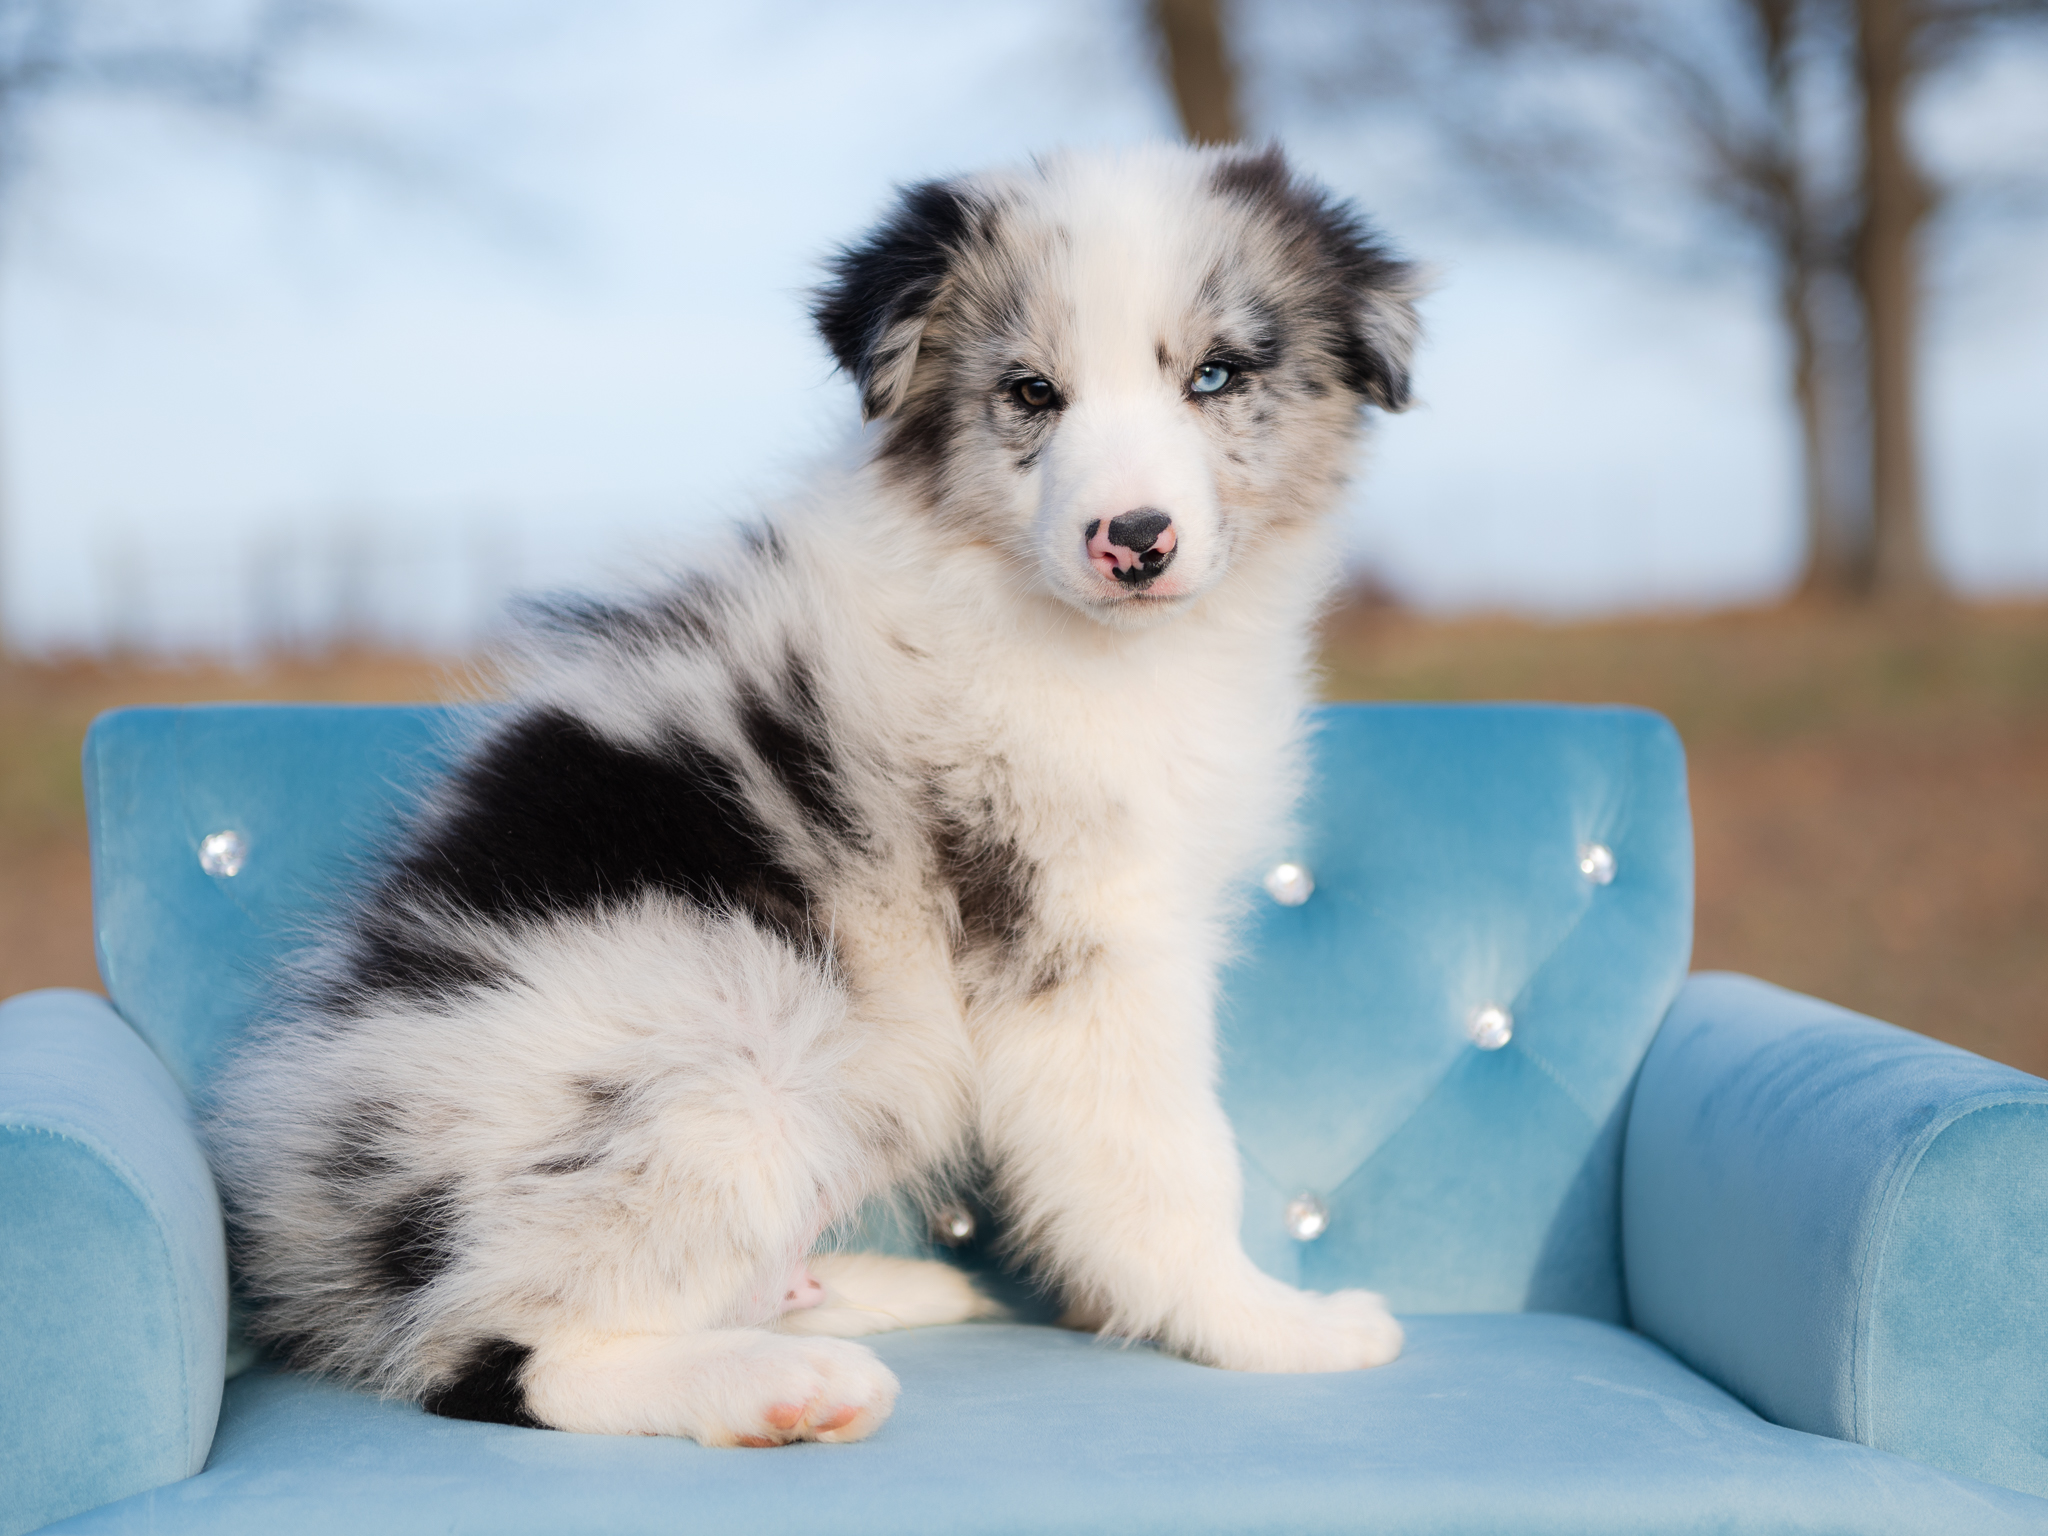 Blue merle Border Collie puppy for sale.